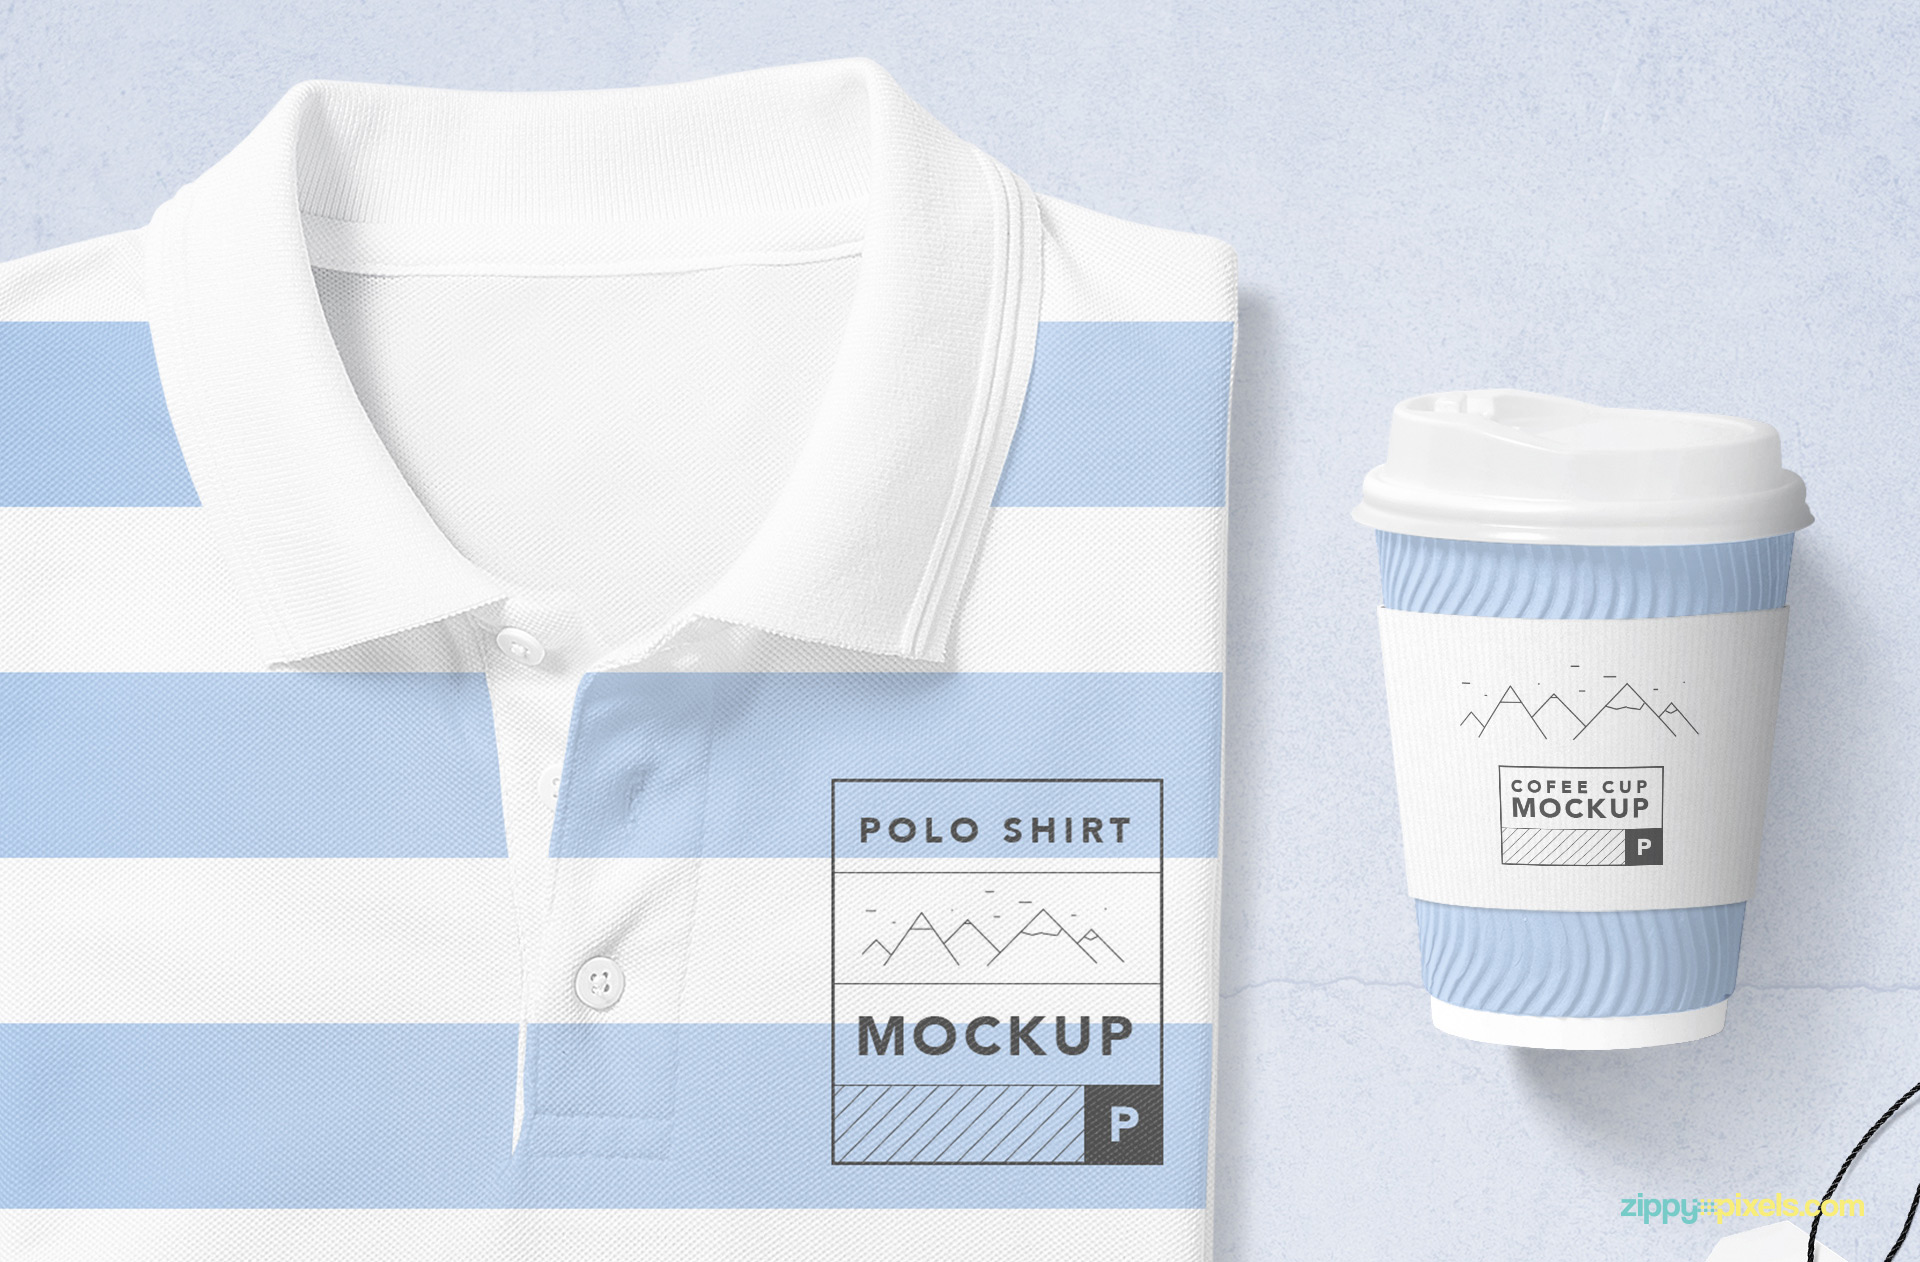 Cup is placed beside collar t-shirt.